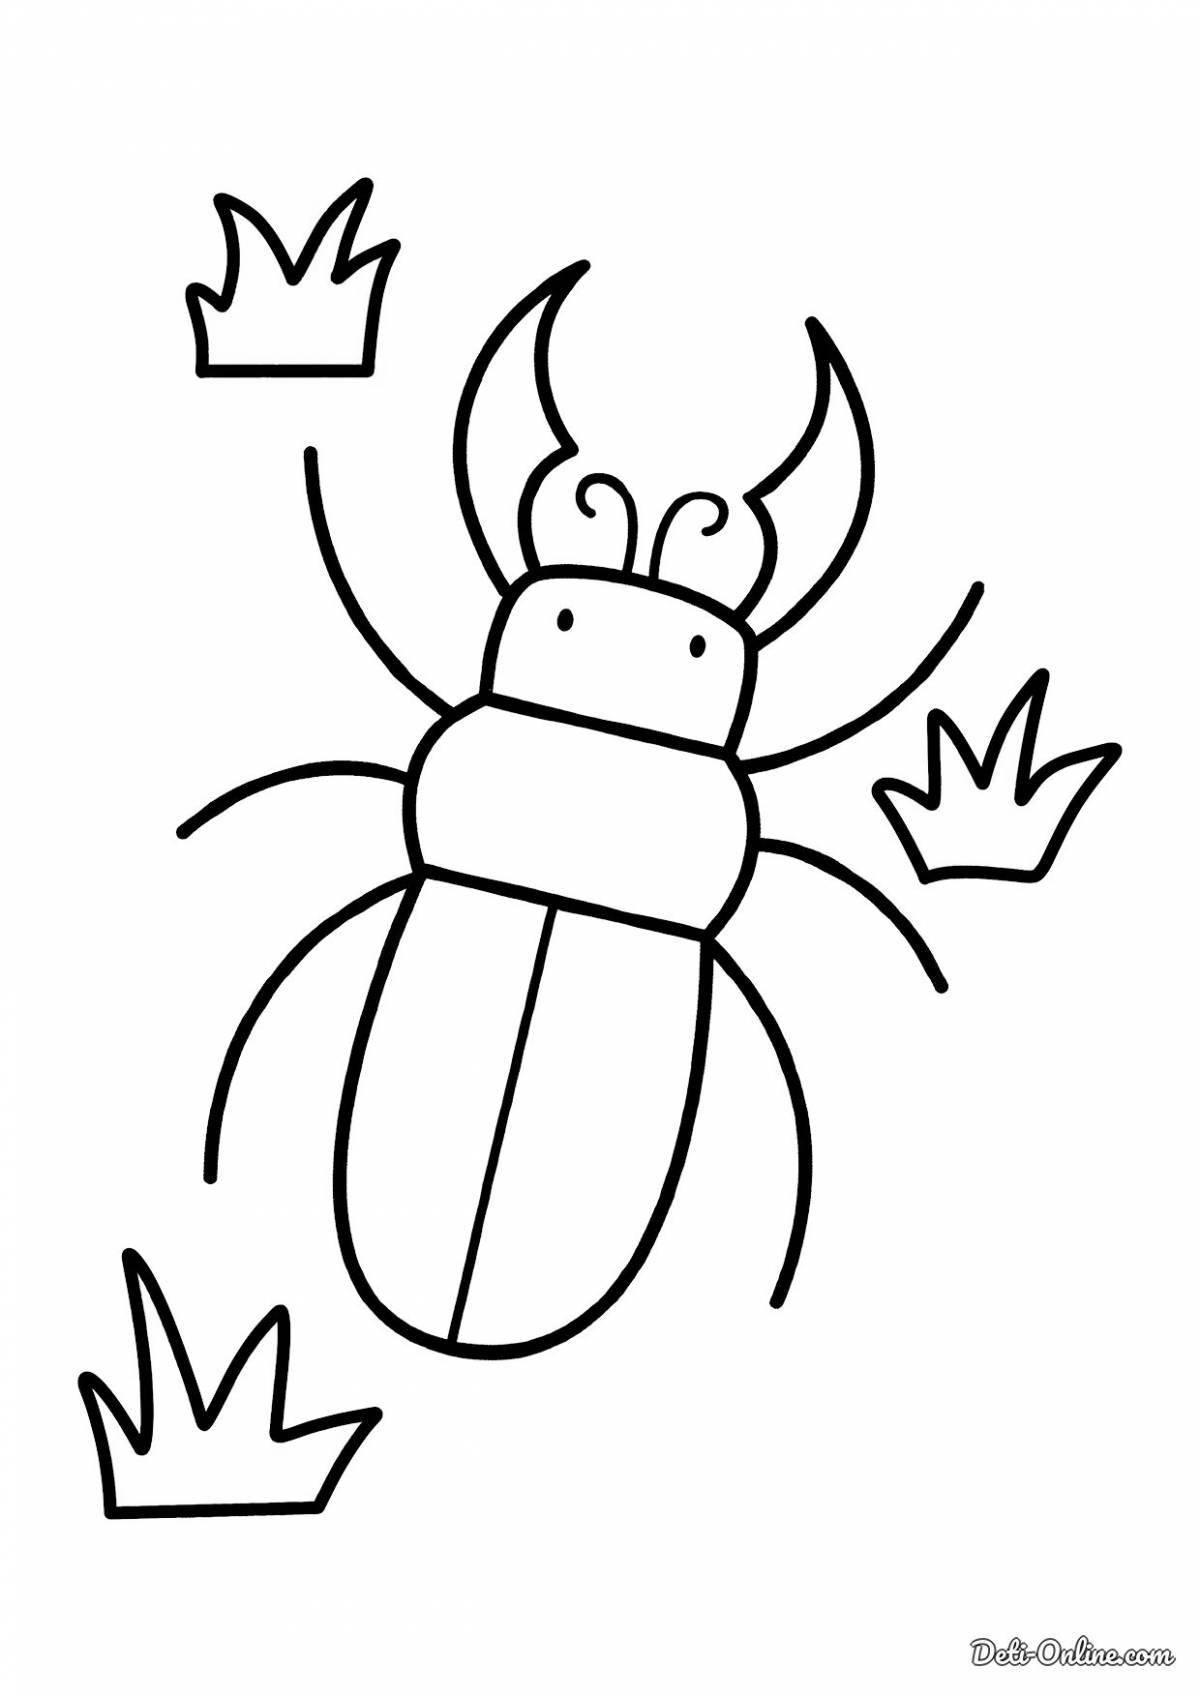 Deluxe stag beetle coloring book